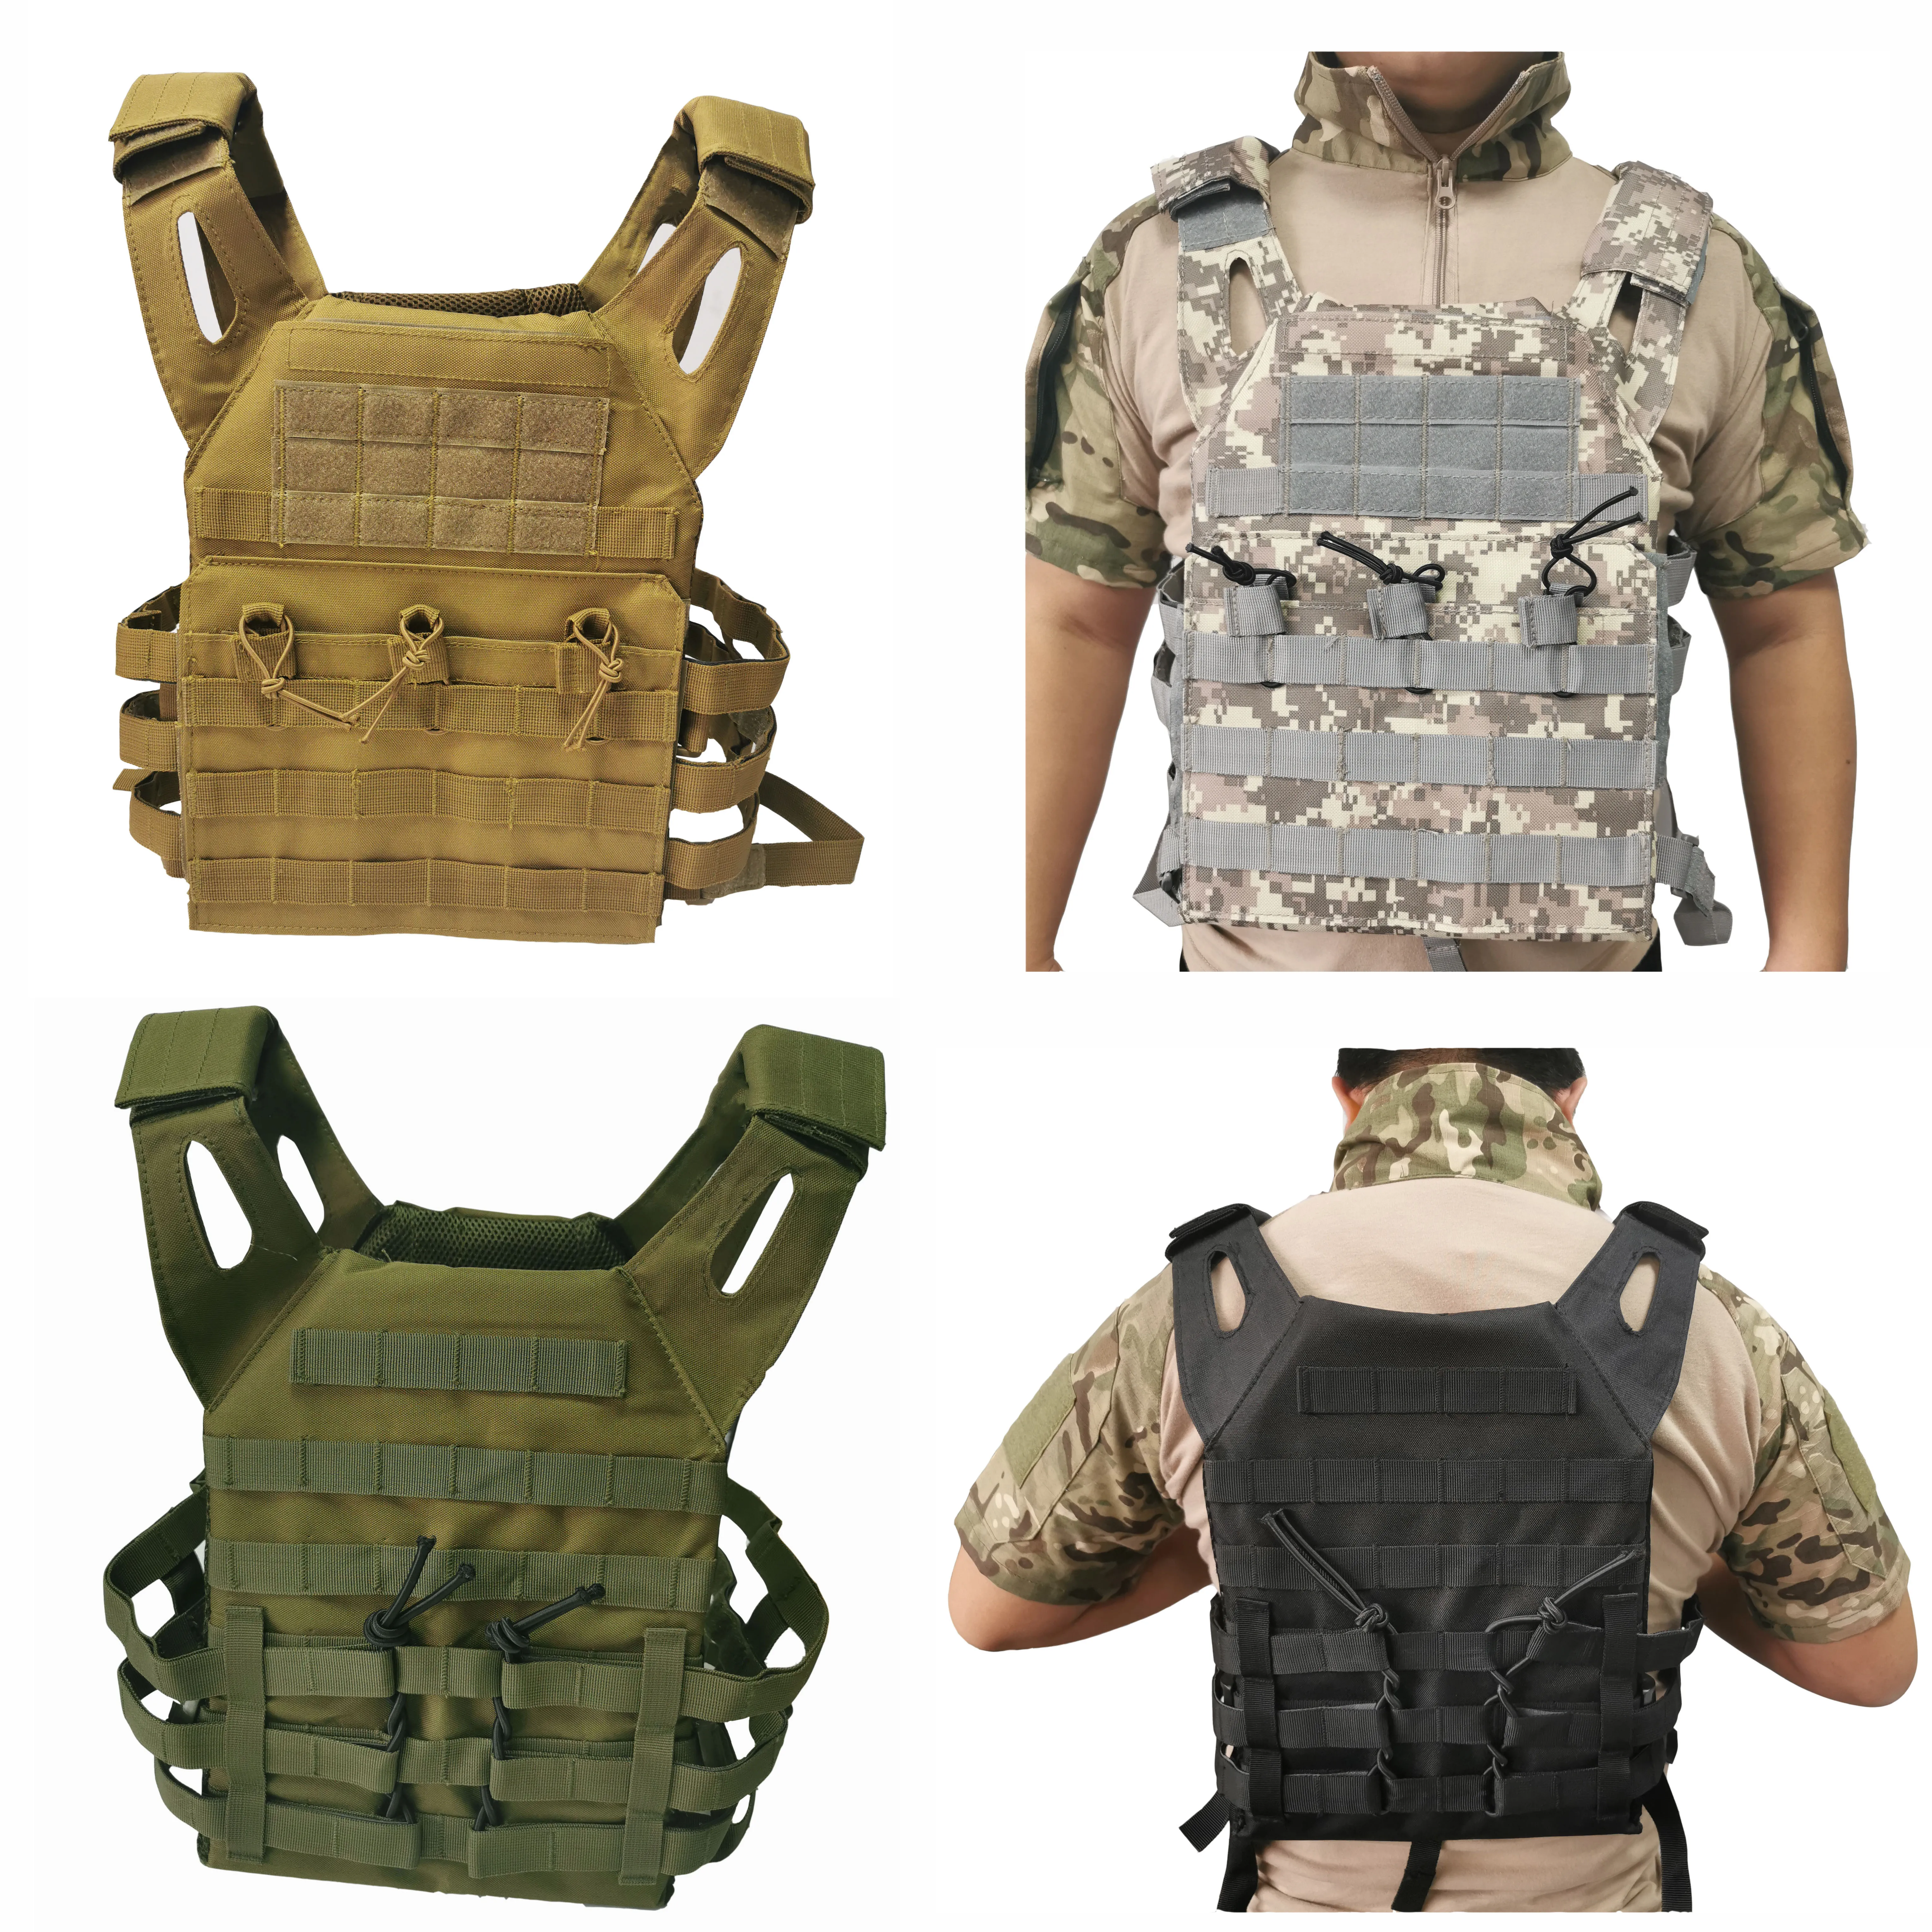 

Hunting Tactical Armor JPC combat Vest Outdoor CS Game Paintball Protective Plate Carrier Waistcoat Airsoft Bulletproof Vest